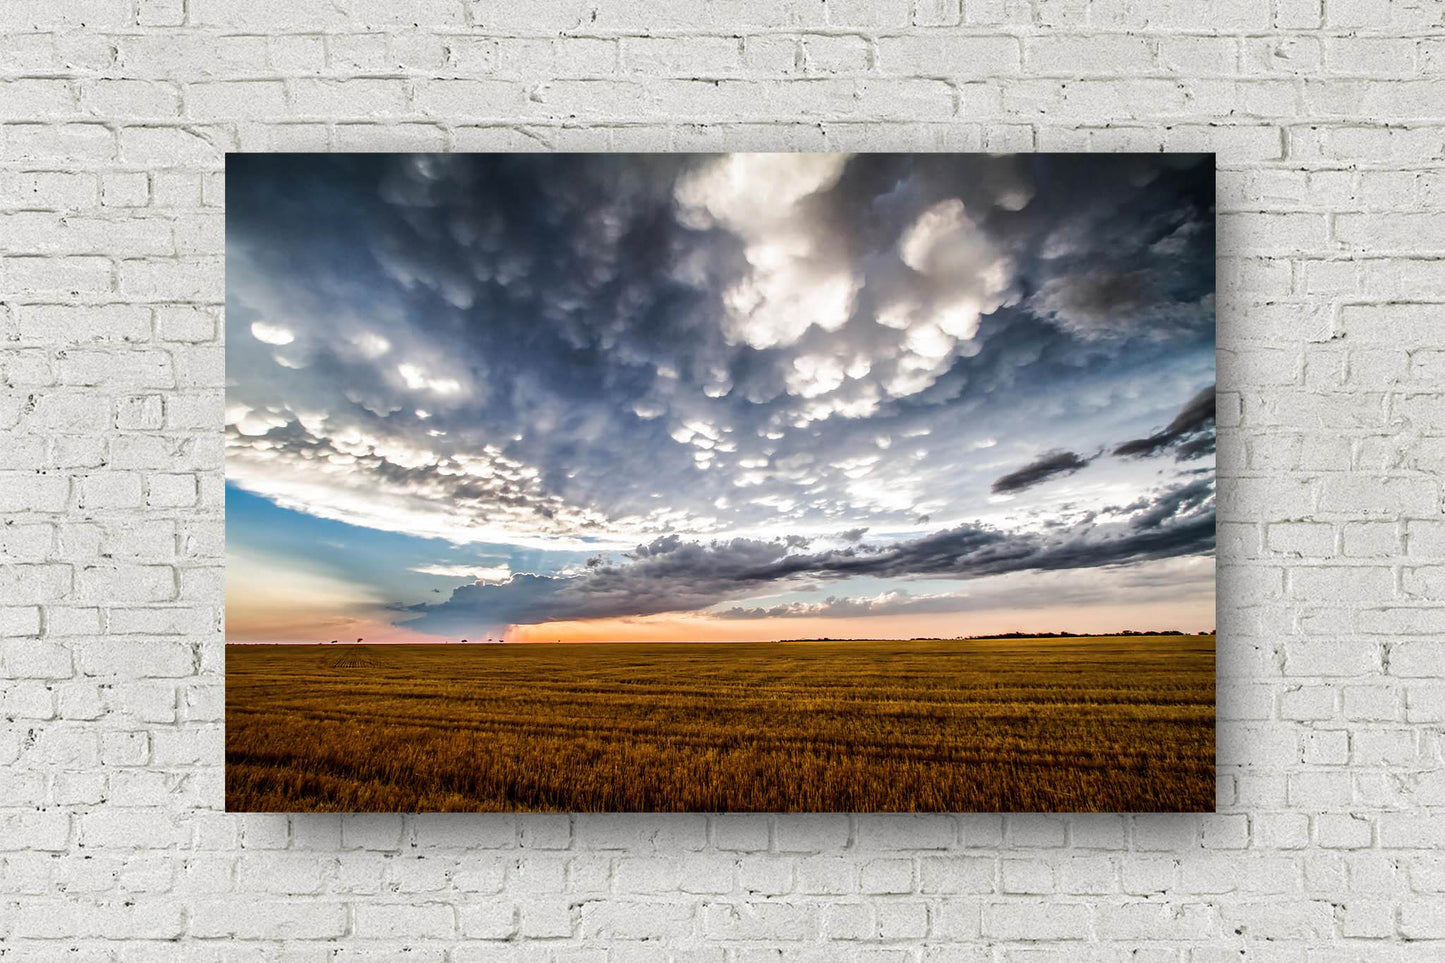 Great Plains metal print wall art of a scenic sky over a freshly cut wheat field after a stormy spring evening in Texas by Sean Ramsey of Southern Plains Photography.